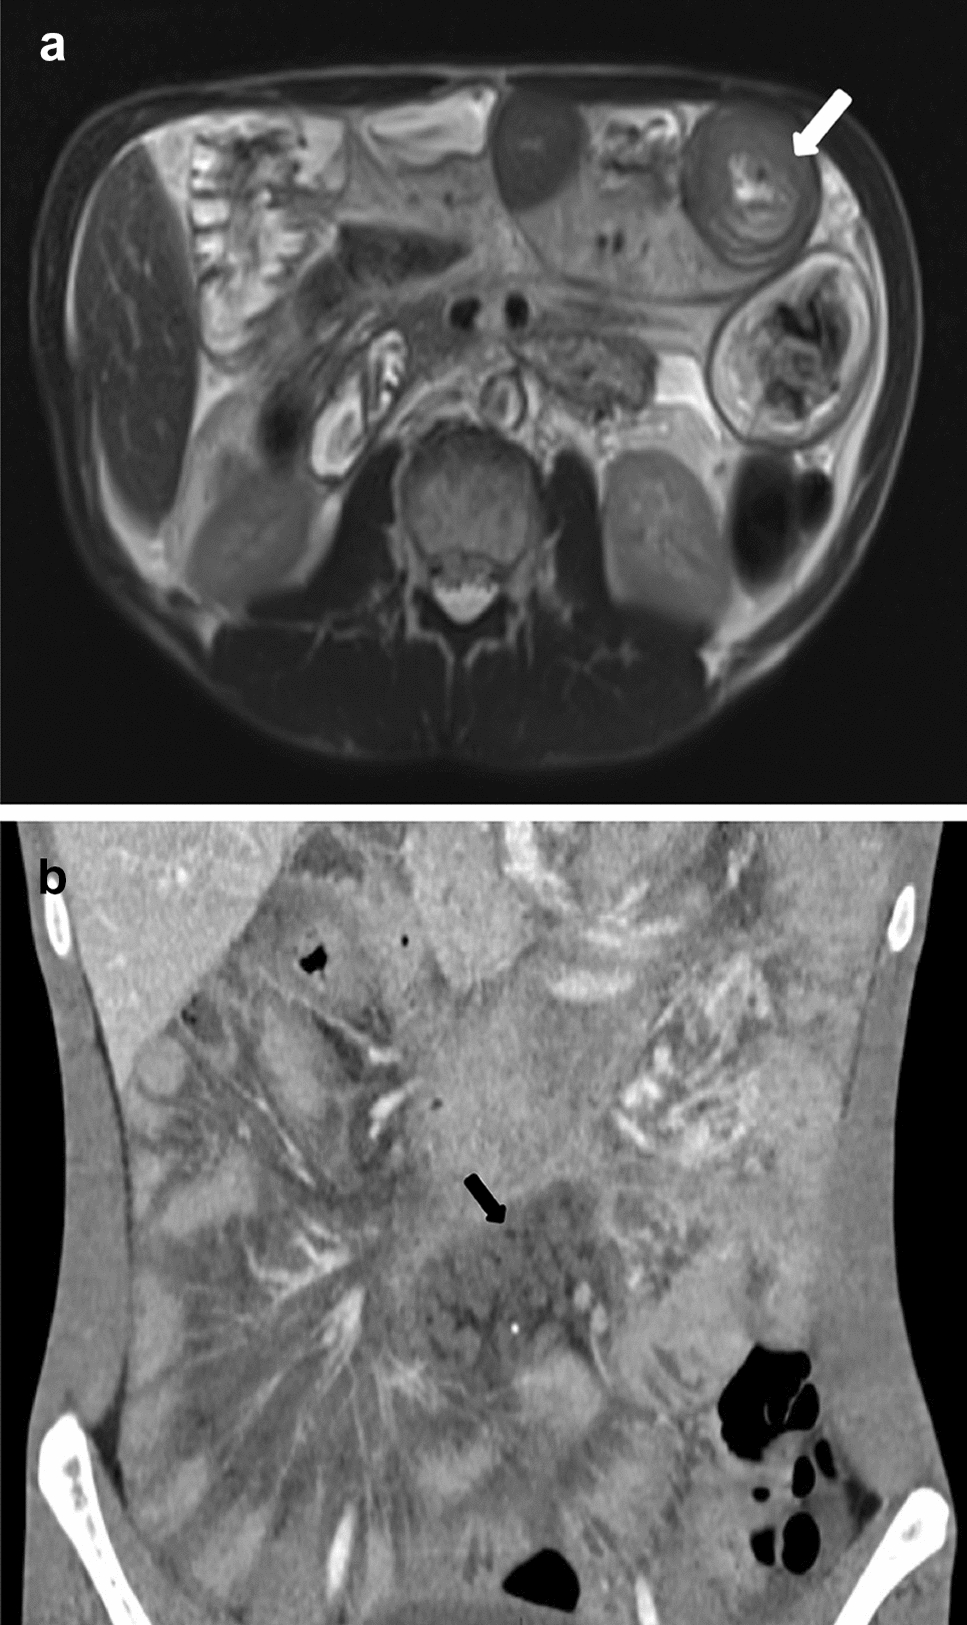 Diffuse abdominal lymphangiomatosis without tumoral masses: a case report